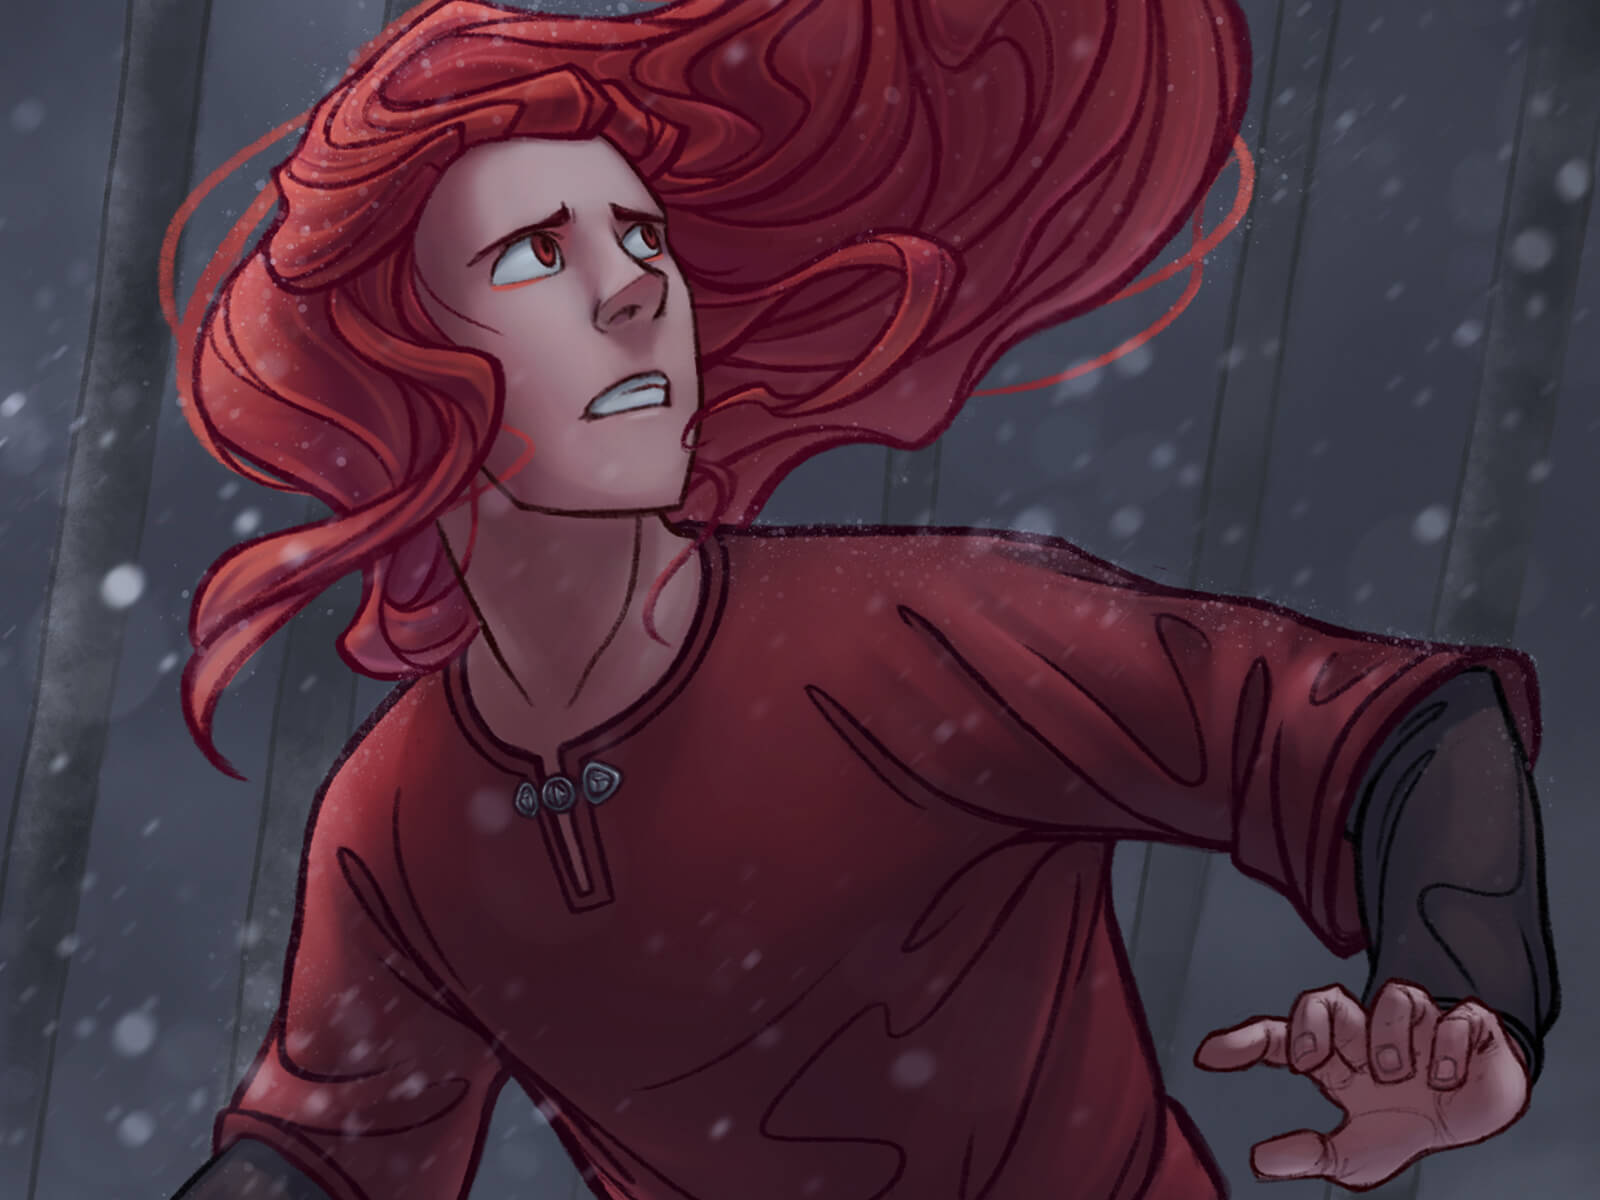 A man with long red hair in a red tunic looks worriedly over his shoulder in a snowy environment.